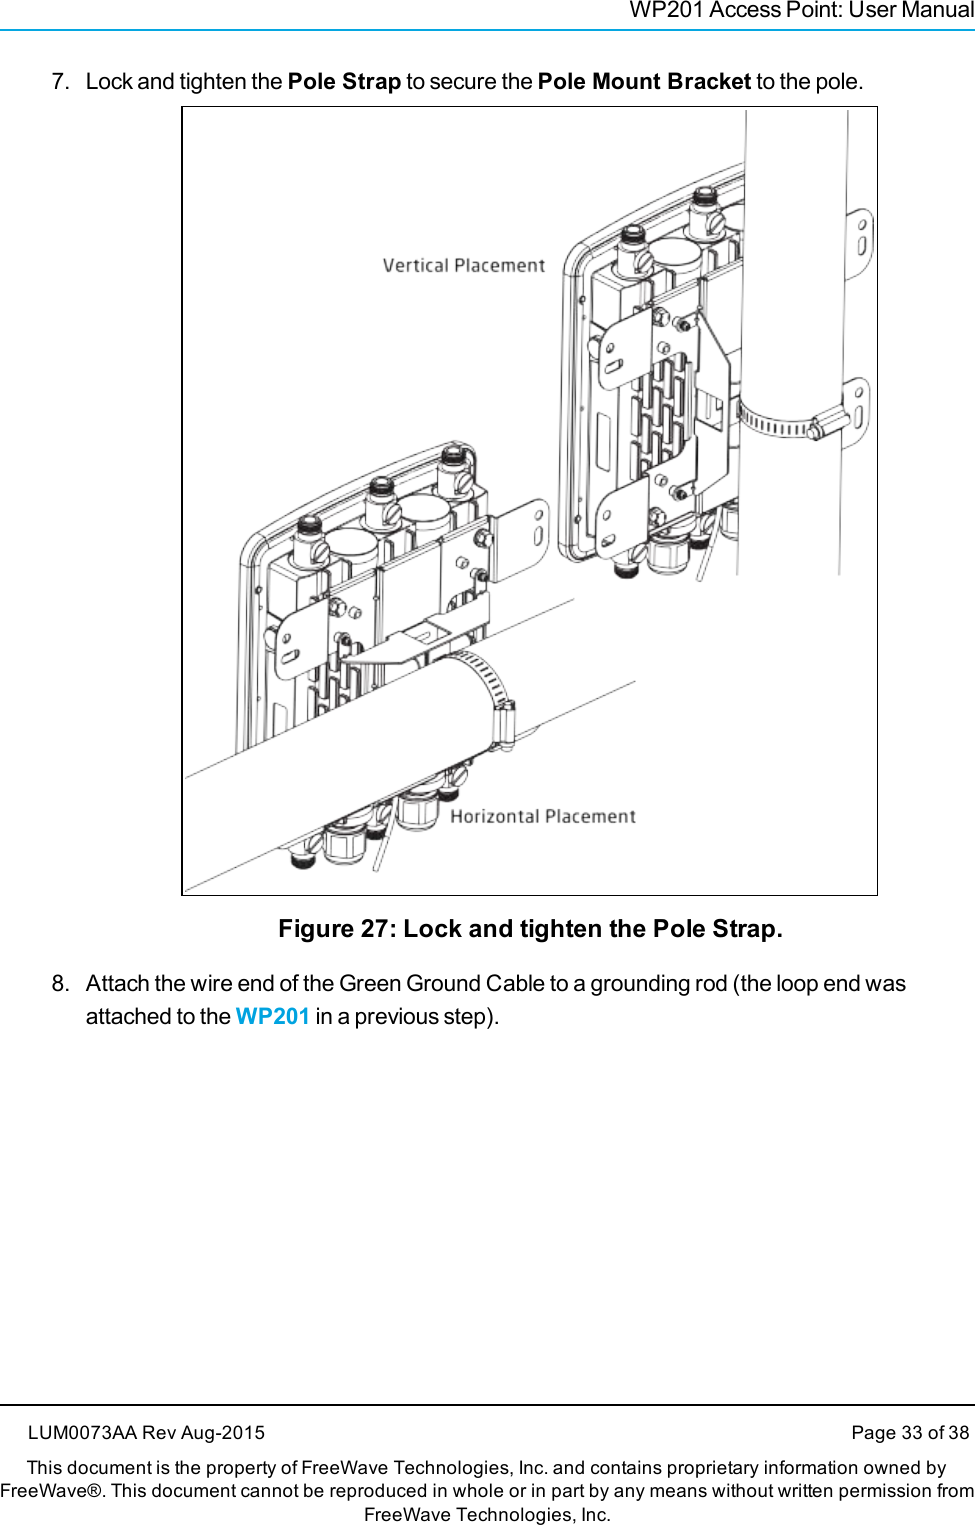 WP201 Access Point: User Manual7. Lock and tighten the Pole Strap to secure the Pole Mount Bracket to the pole.Figure 27: Lock and tighten the Pole Strap.8. Attach the wire end of the Green Ground Cable to a grounding rod (the loop end wasattached to the WP201 in a previous step).LUM0073AA Rev Aug-2015 Page 33 of 38This document is the property of FreeWave Technologies, Inc. and contains proprietary information owned byFreeWave®. This document cannot be reproduced in whole or in part by any means without written permission fromFreeWave Technologies, Inc.